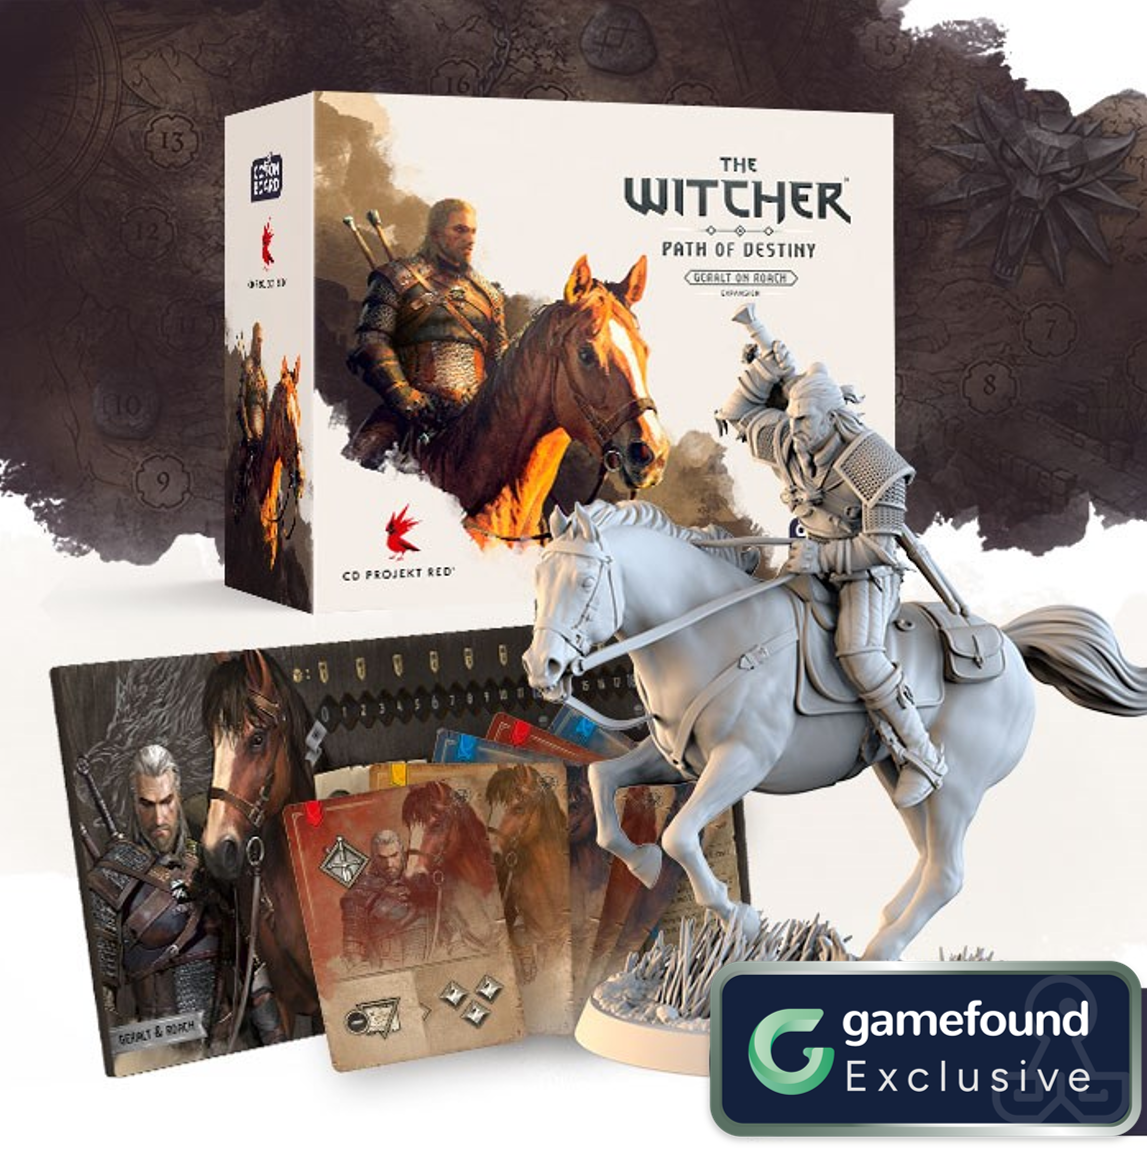 Gamefound Exclusive The Witcher: Path of Destiny Board Game Geralt on Roach Expansion